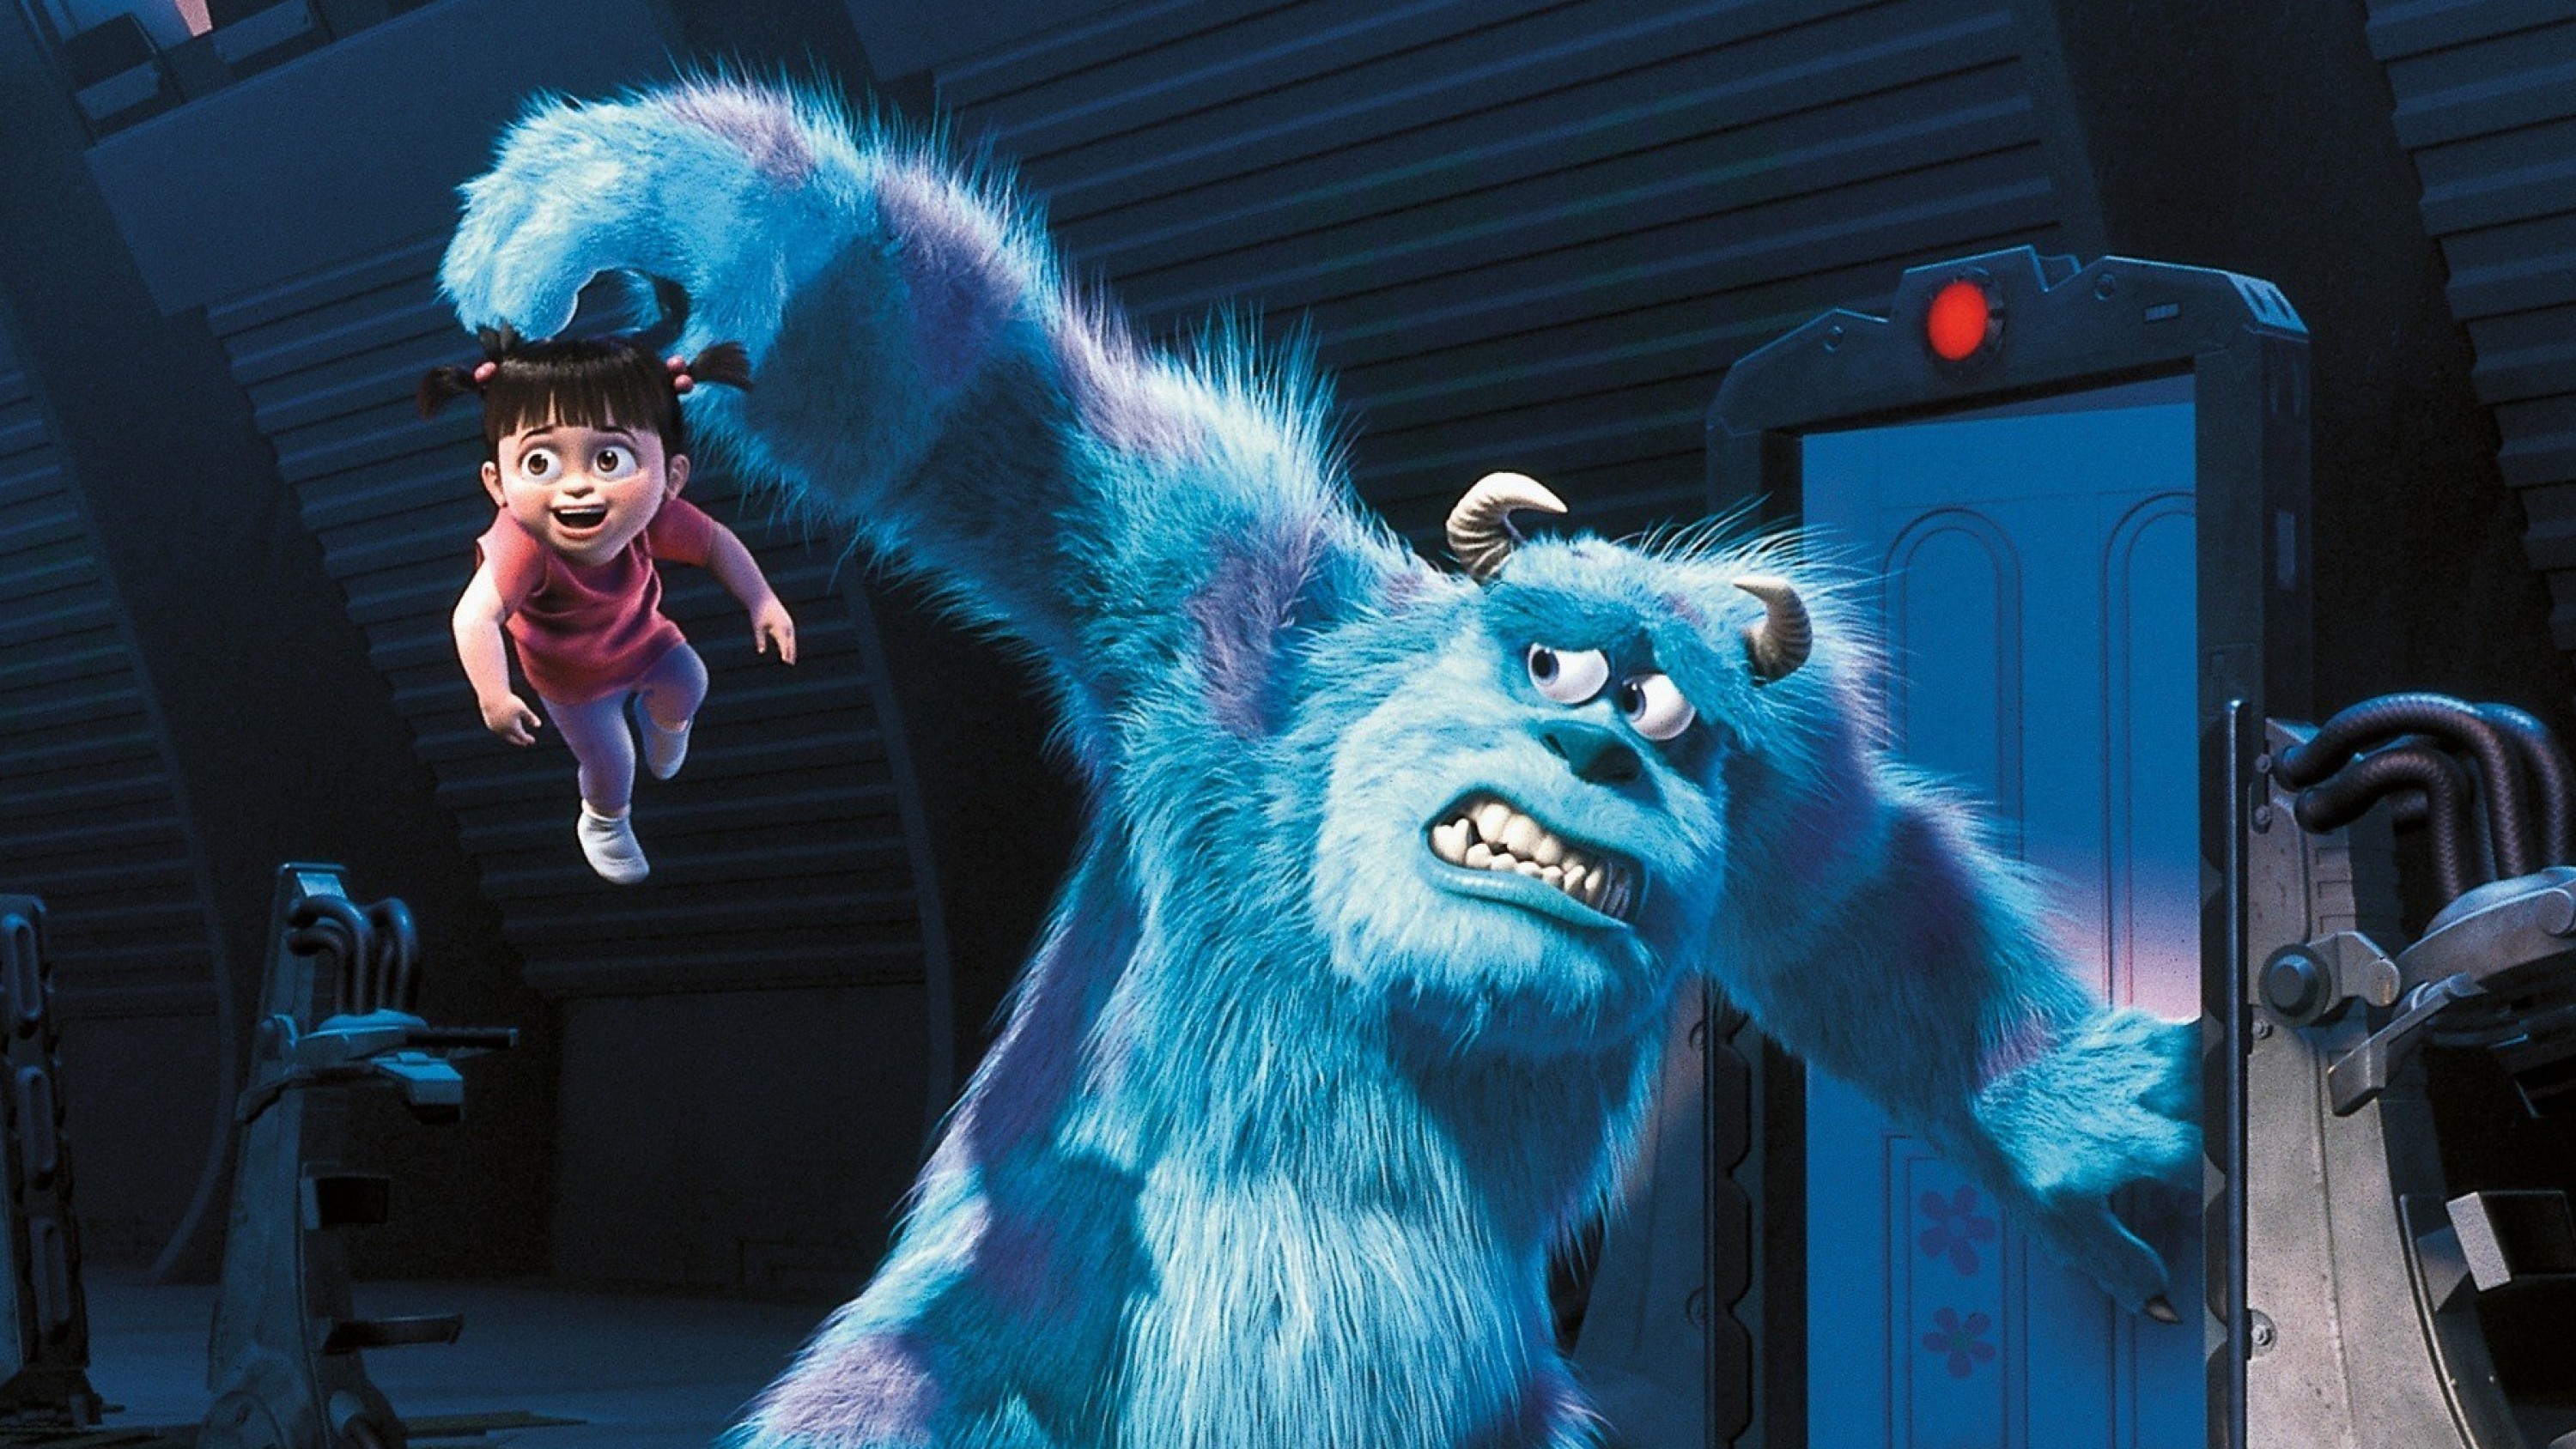 Monsters, Inc Image